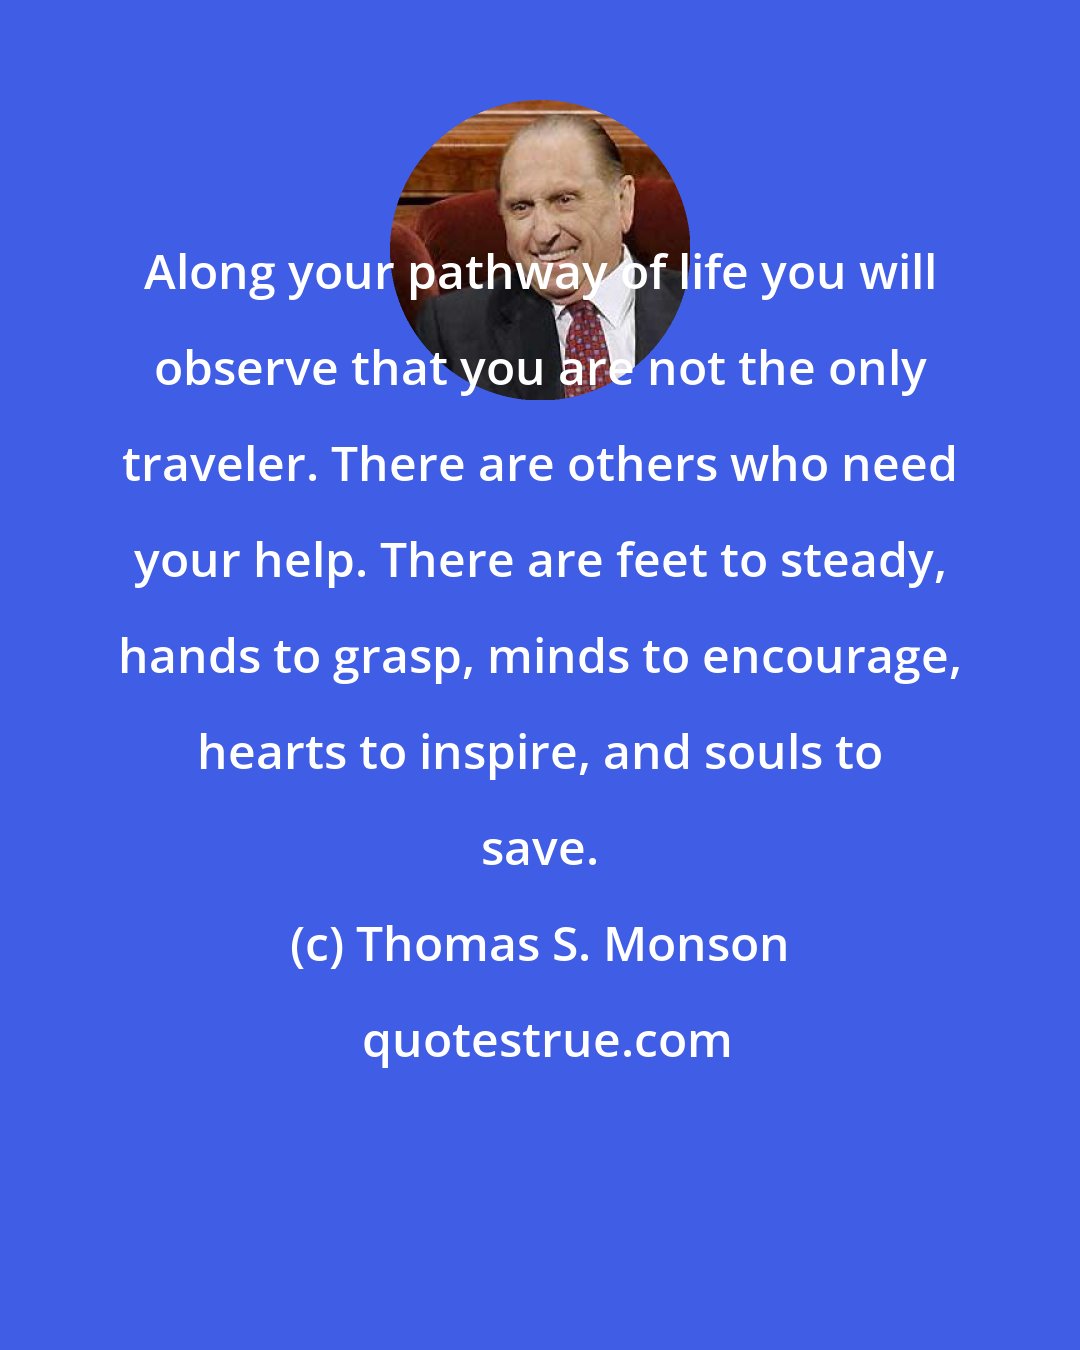 Thomas S. Monson: Along your pathway of life you will observe that you are not the only traveler. There are others who need your help. There are feet to steady, hands to grasp, minds to encourage, hearts to inspire, and souls to save.